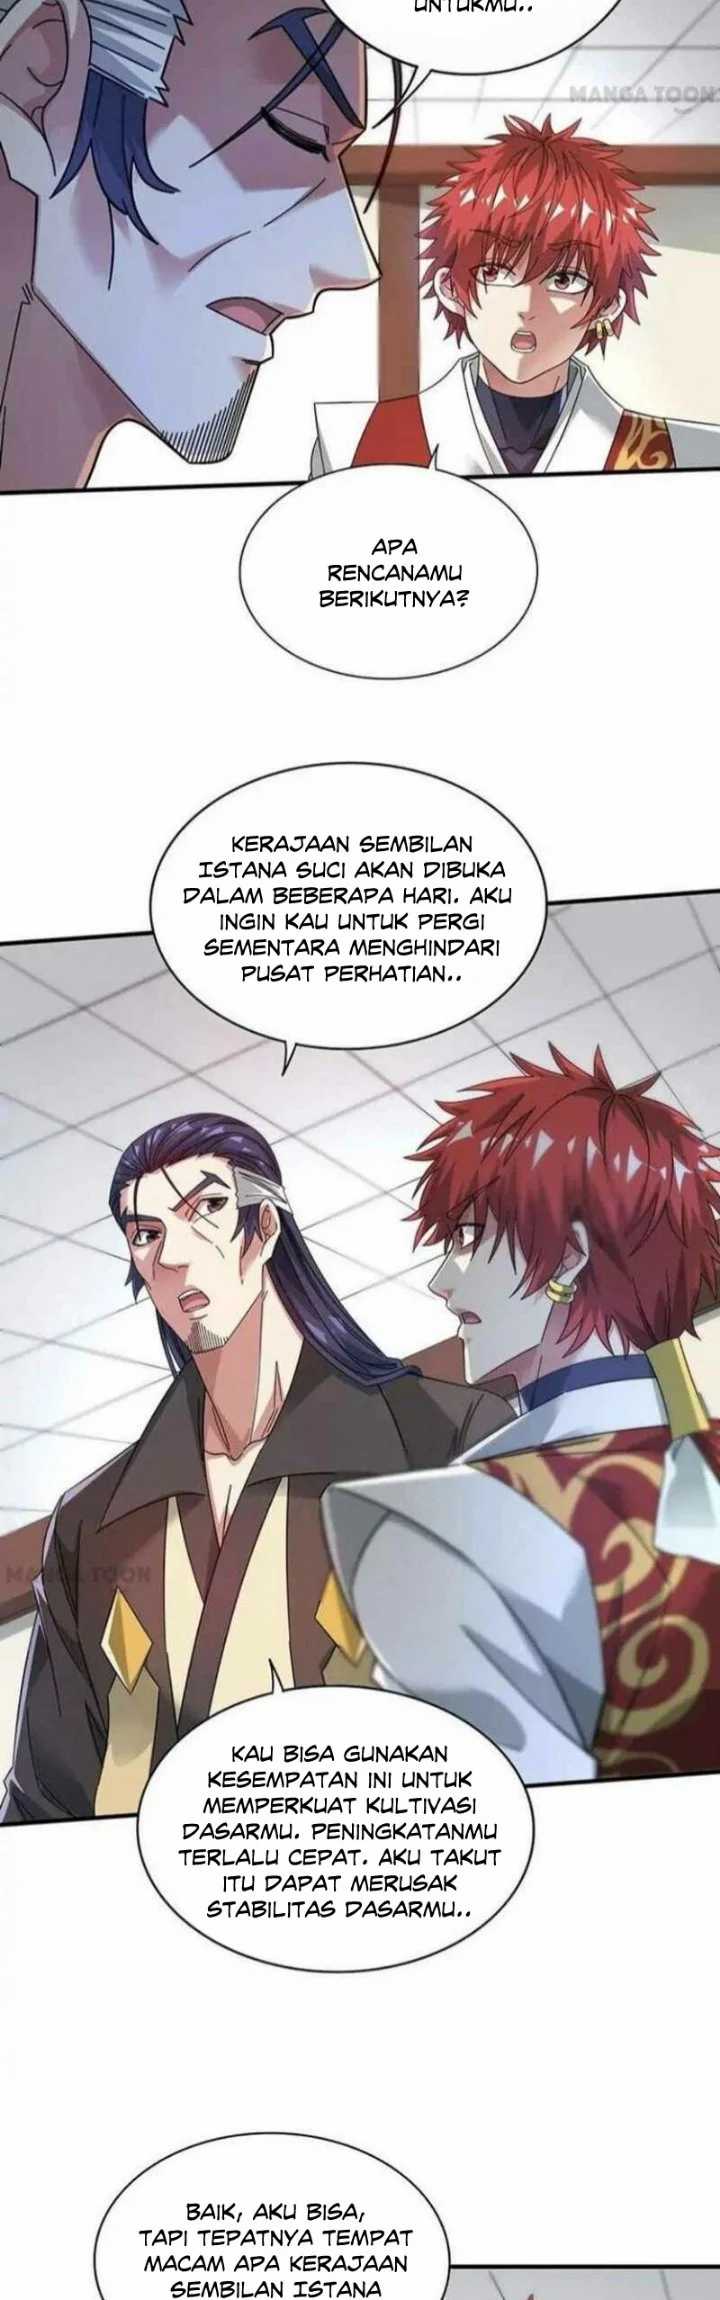 The First Son-In-Law Vanguard of All Time Chapter 208